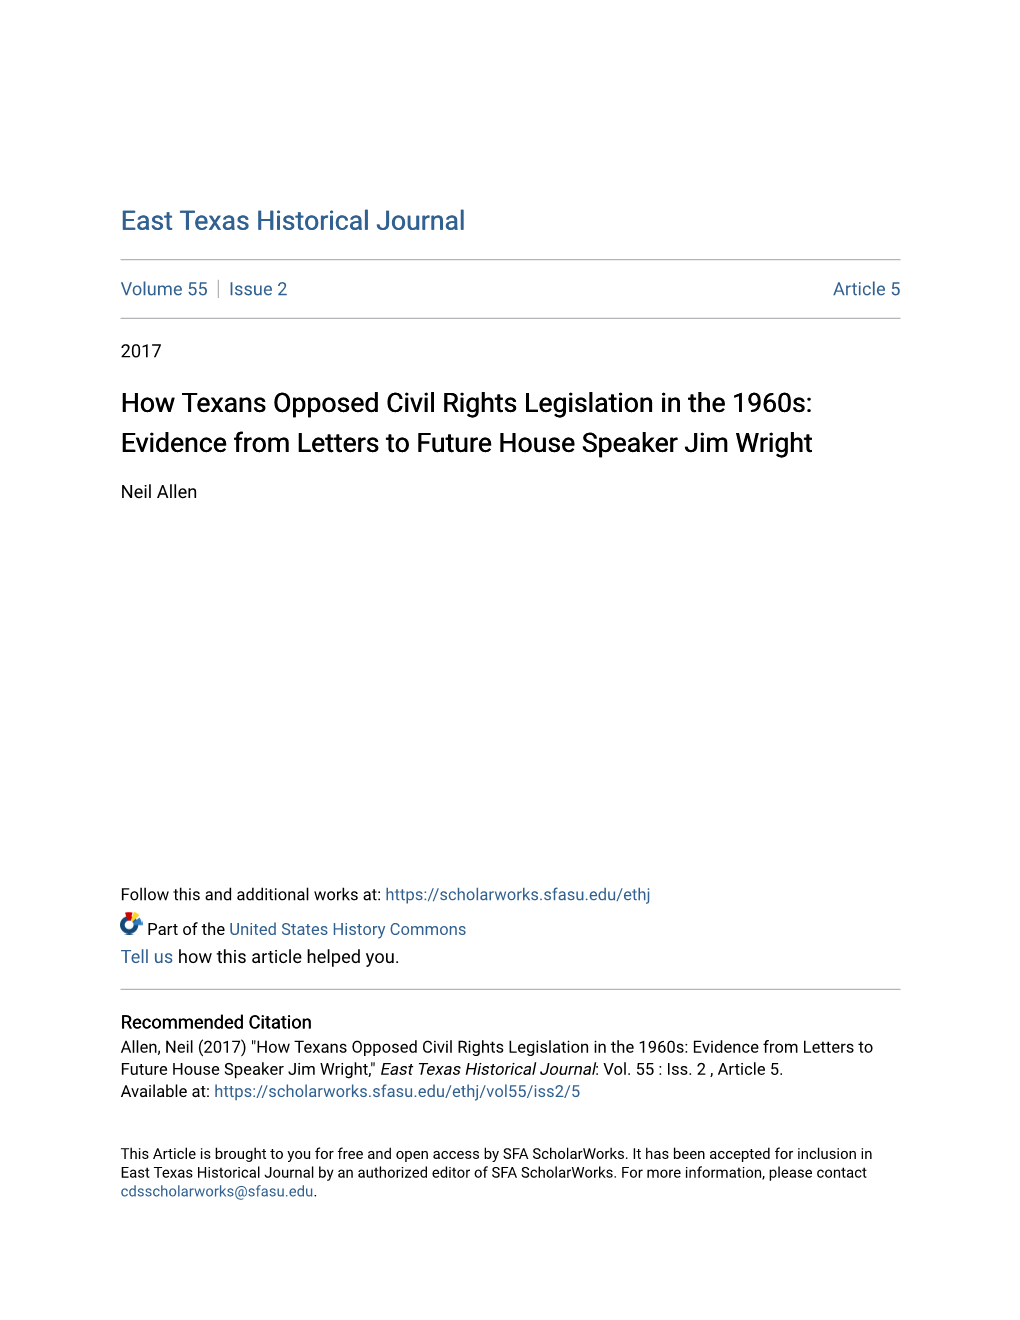 How Texans Opposed Civil Rights Legislation in the 1960S: Evidence from Letters to Future House Speaker Jim Wright